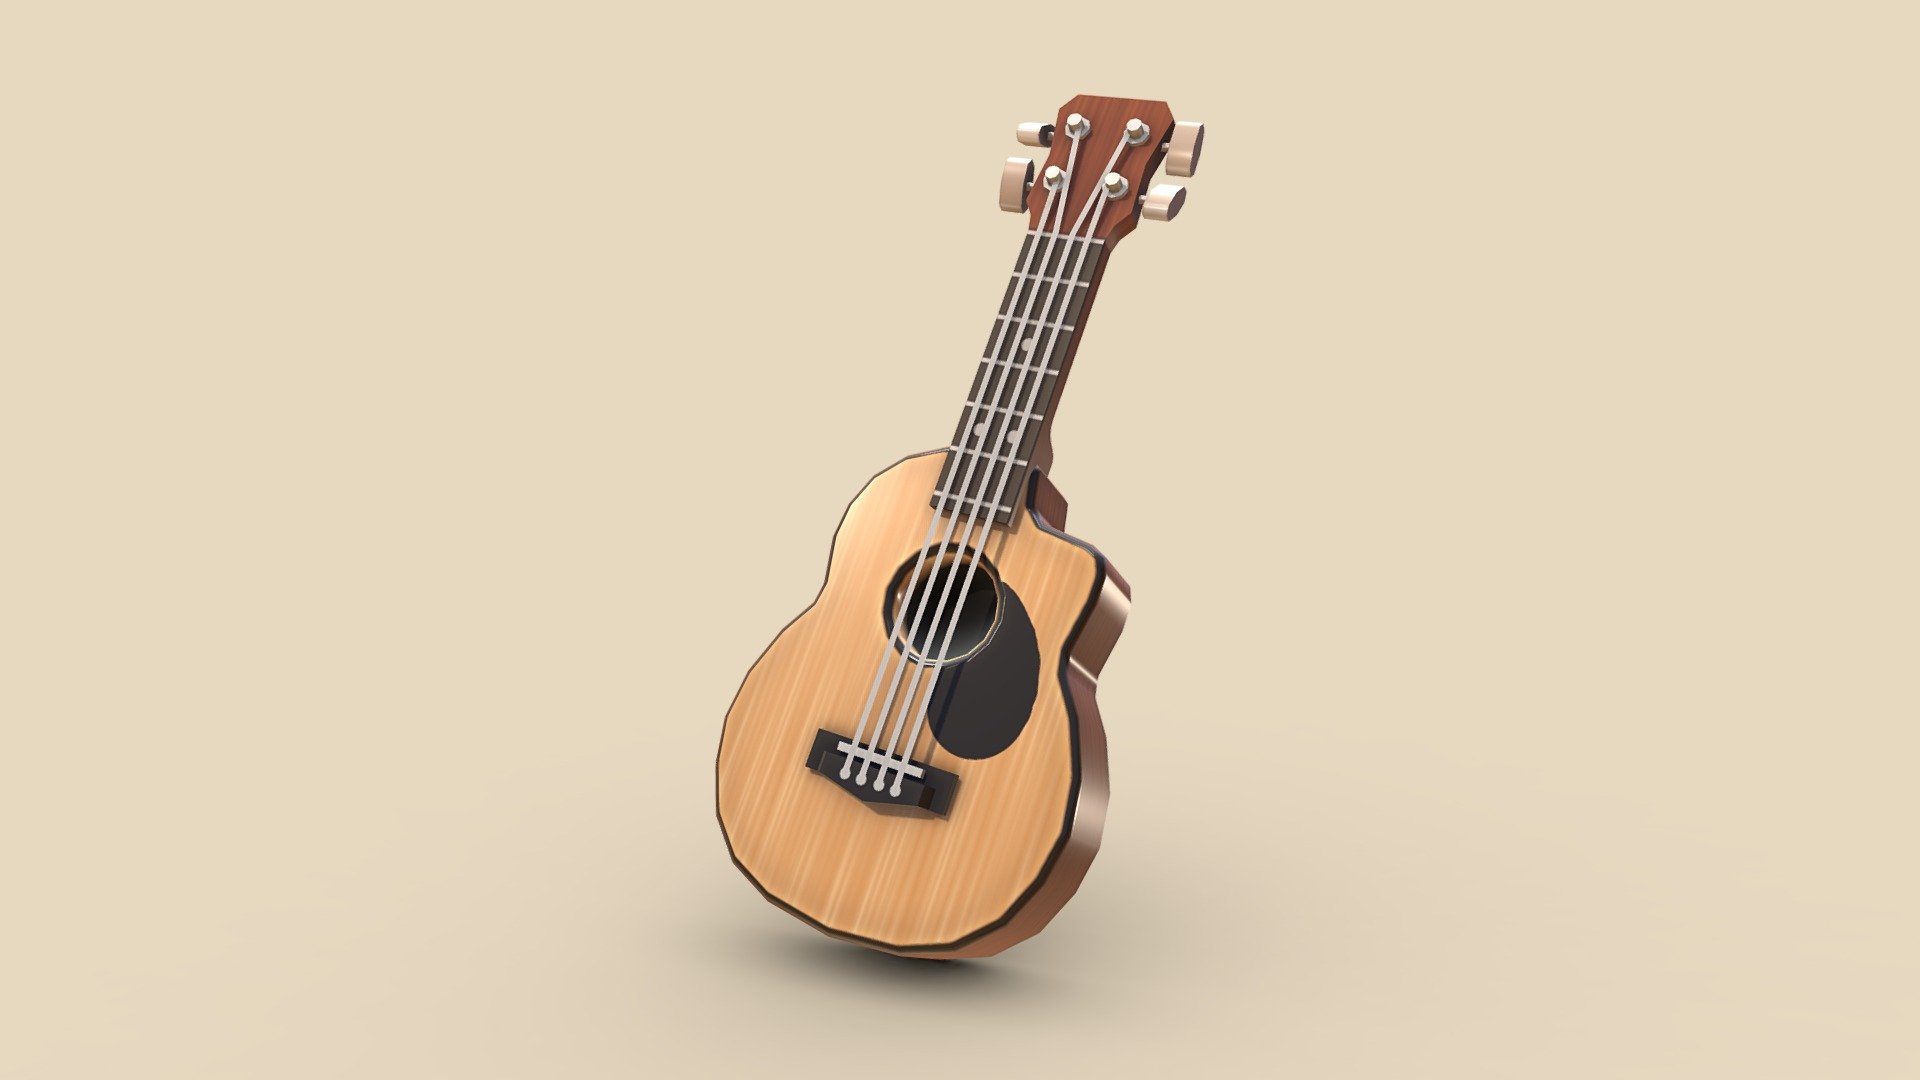 Part of a musical instrument set. Yes, I know guitars have 6 strings! :D

See the rest of the set on artstation: https://www.artstation.com/artwork/oOLV6q - Chunky Acoustic Guitar - 3D model by autumnpioneer 3d model